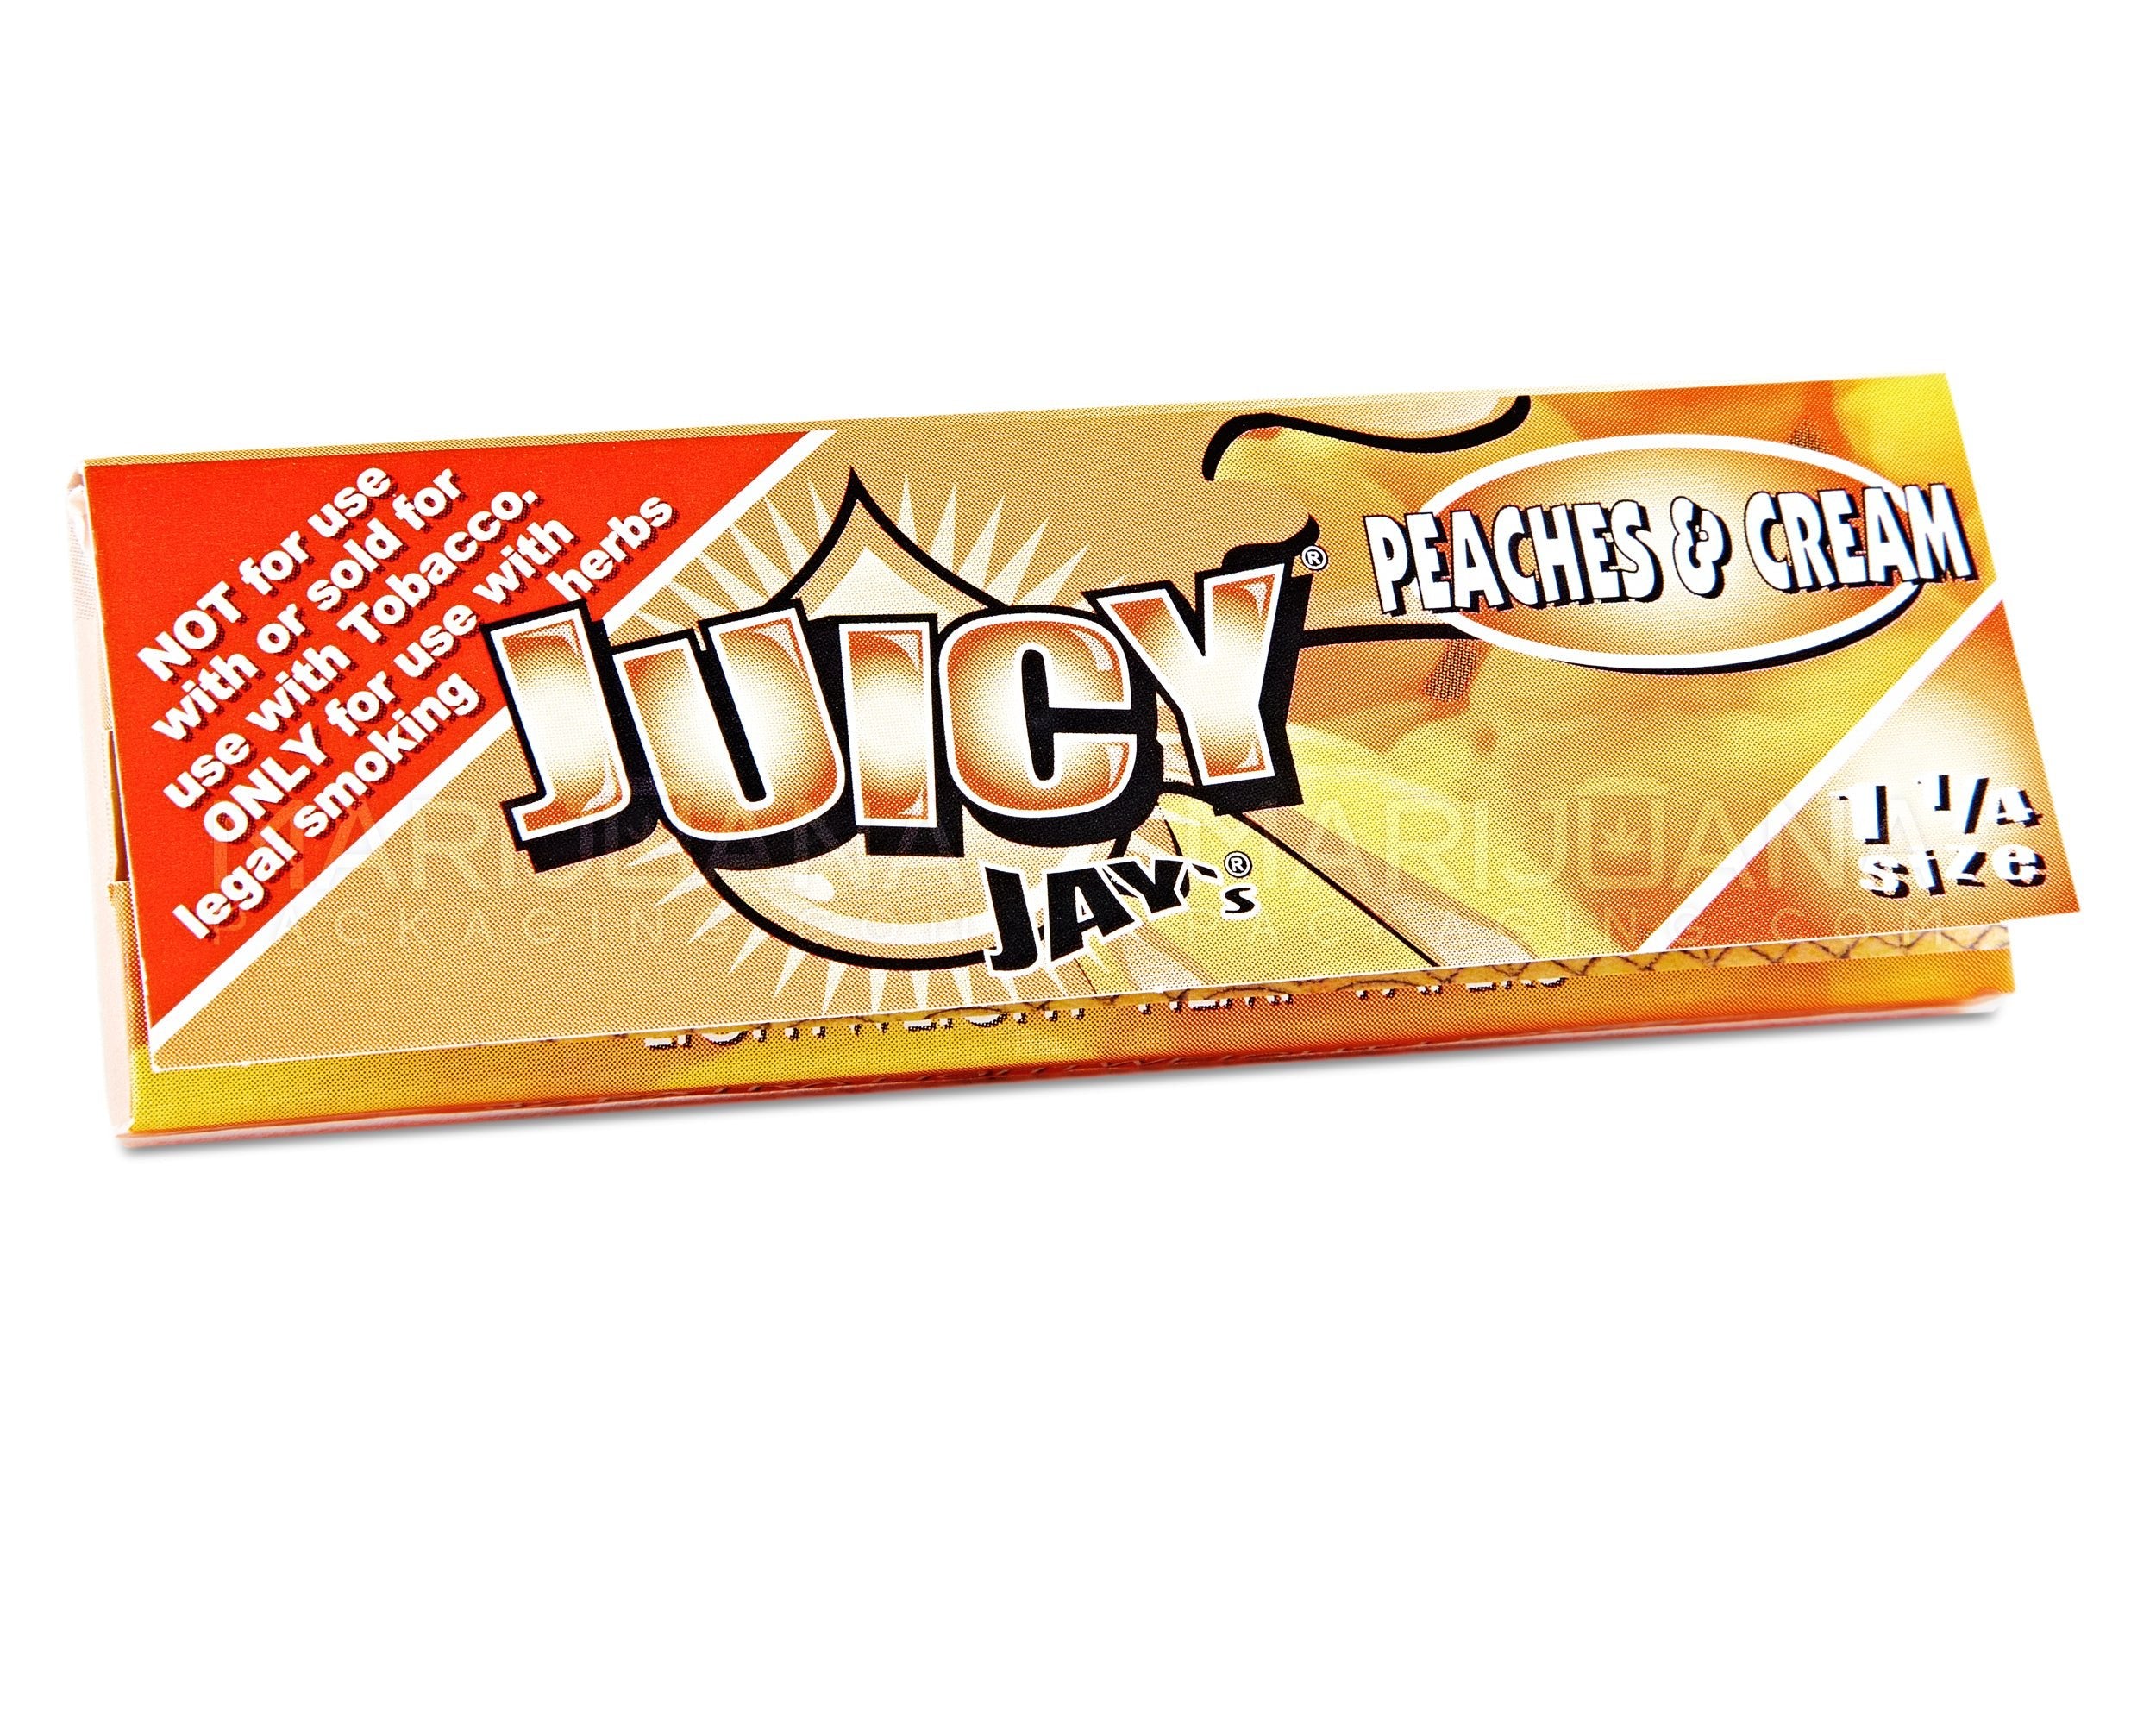 JUICY JAY'S | 'Retail Display' 1 1/4 Size Hemp Rolling Papers | 76mm - Peaches & Cream - 24 Count - 2